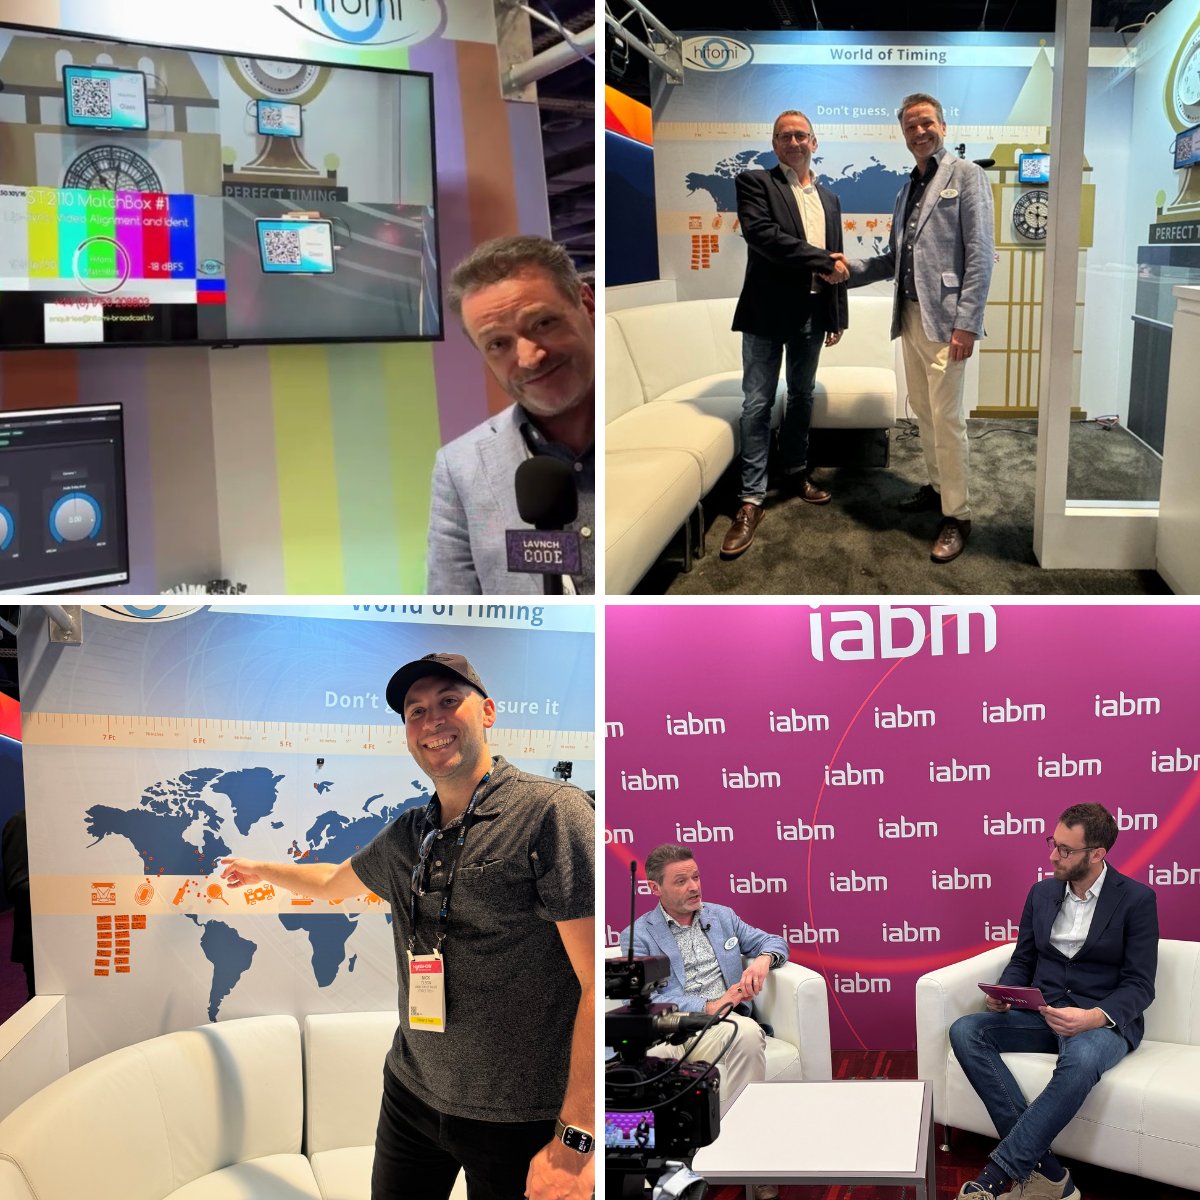 We've had a great time today at #NABShow on booth #SL5080 demonstrating our solutions for #lipsync and #latency measurement, celebrating our new partnership with @esbroadcasthire & discovering where our technology has been used around the world. @NABShow @lavnchcode @TheIABM